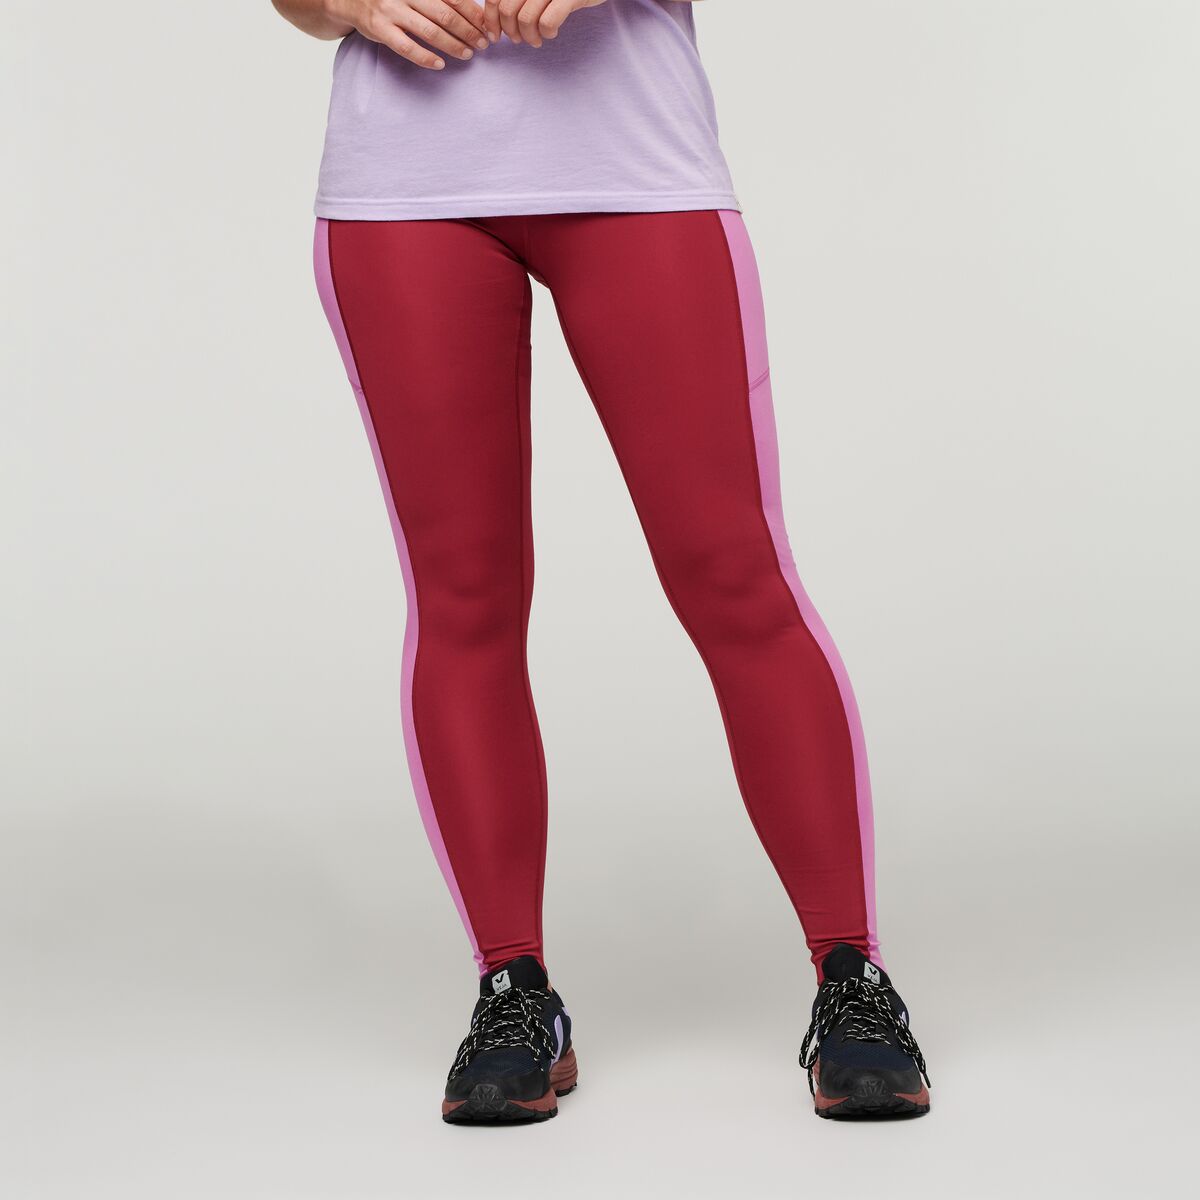 Cotopaxi - W's Roso Tight - Recycled Polyester - Weekendbee - sustainable sportswear